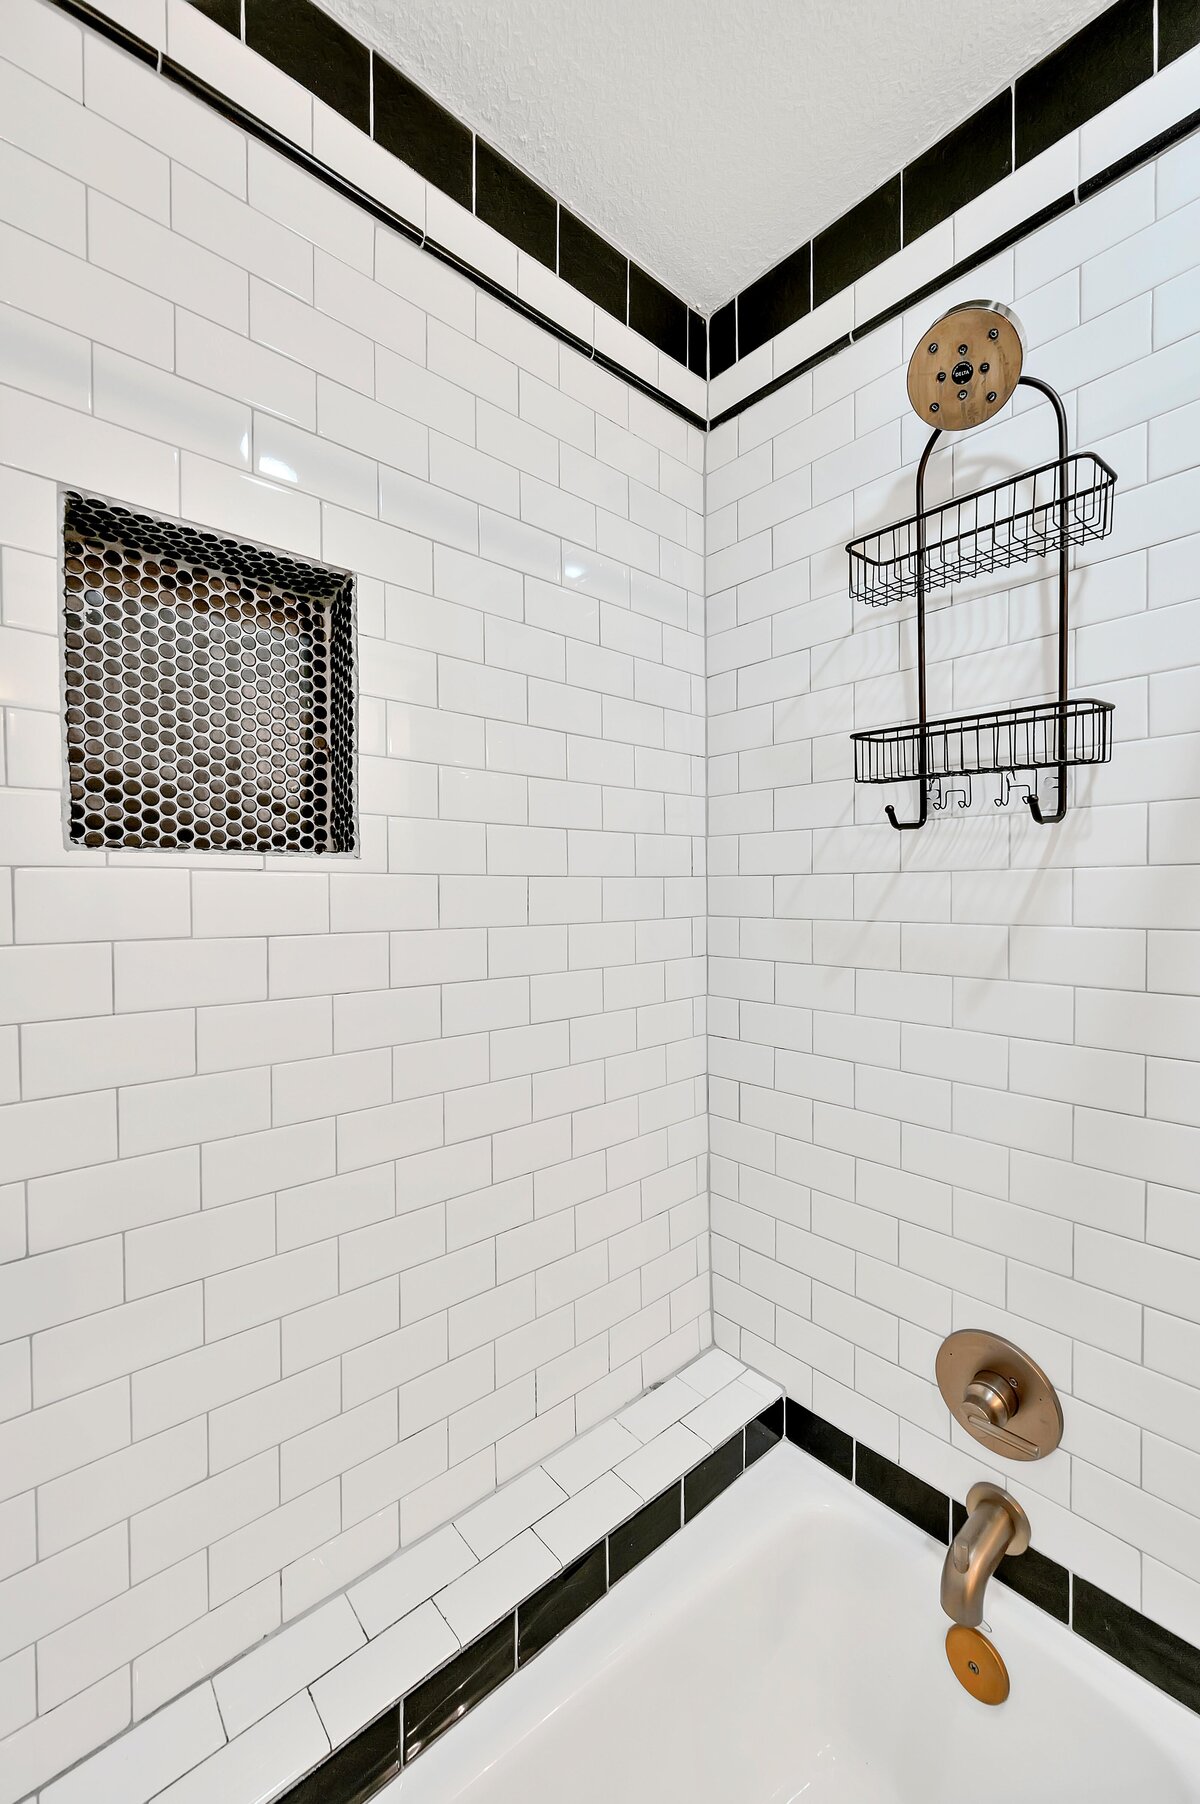 Tub/shower combo in the full bathroom of this two-bedroom, two-bathroom vacation rental condo in the historic Behrens building in the heart of the Magnolia Silo District in downtown Waco, TX.